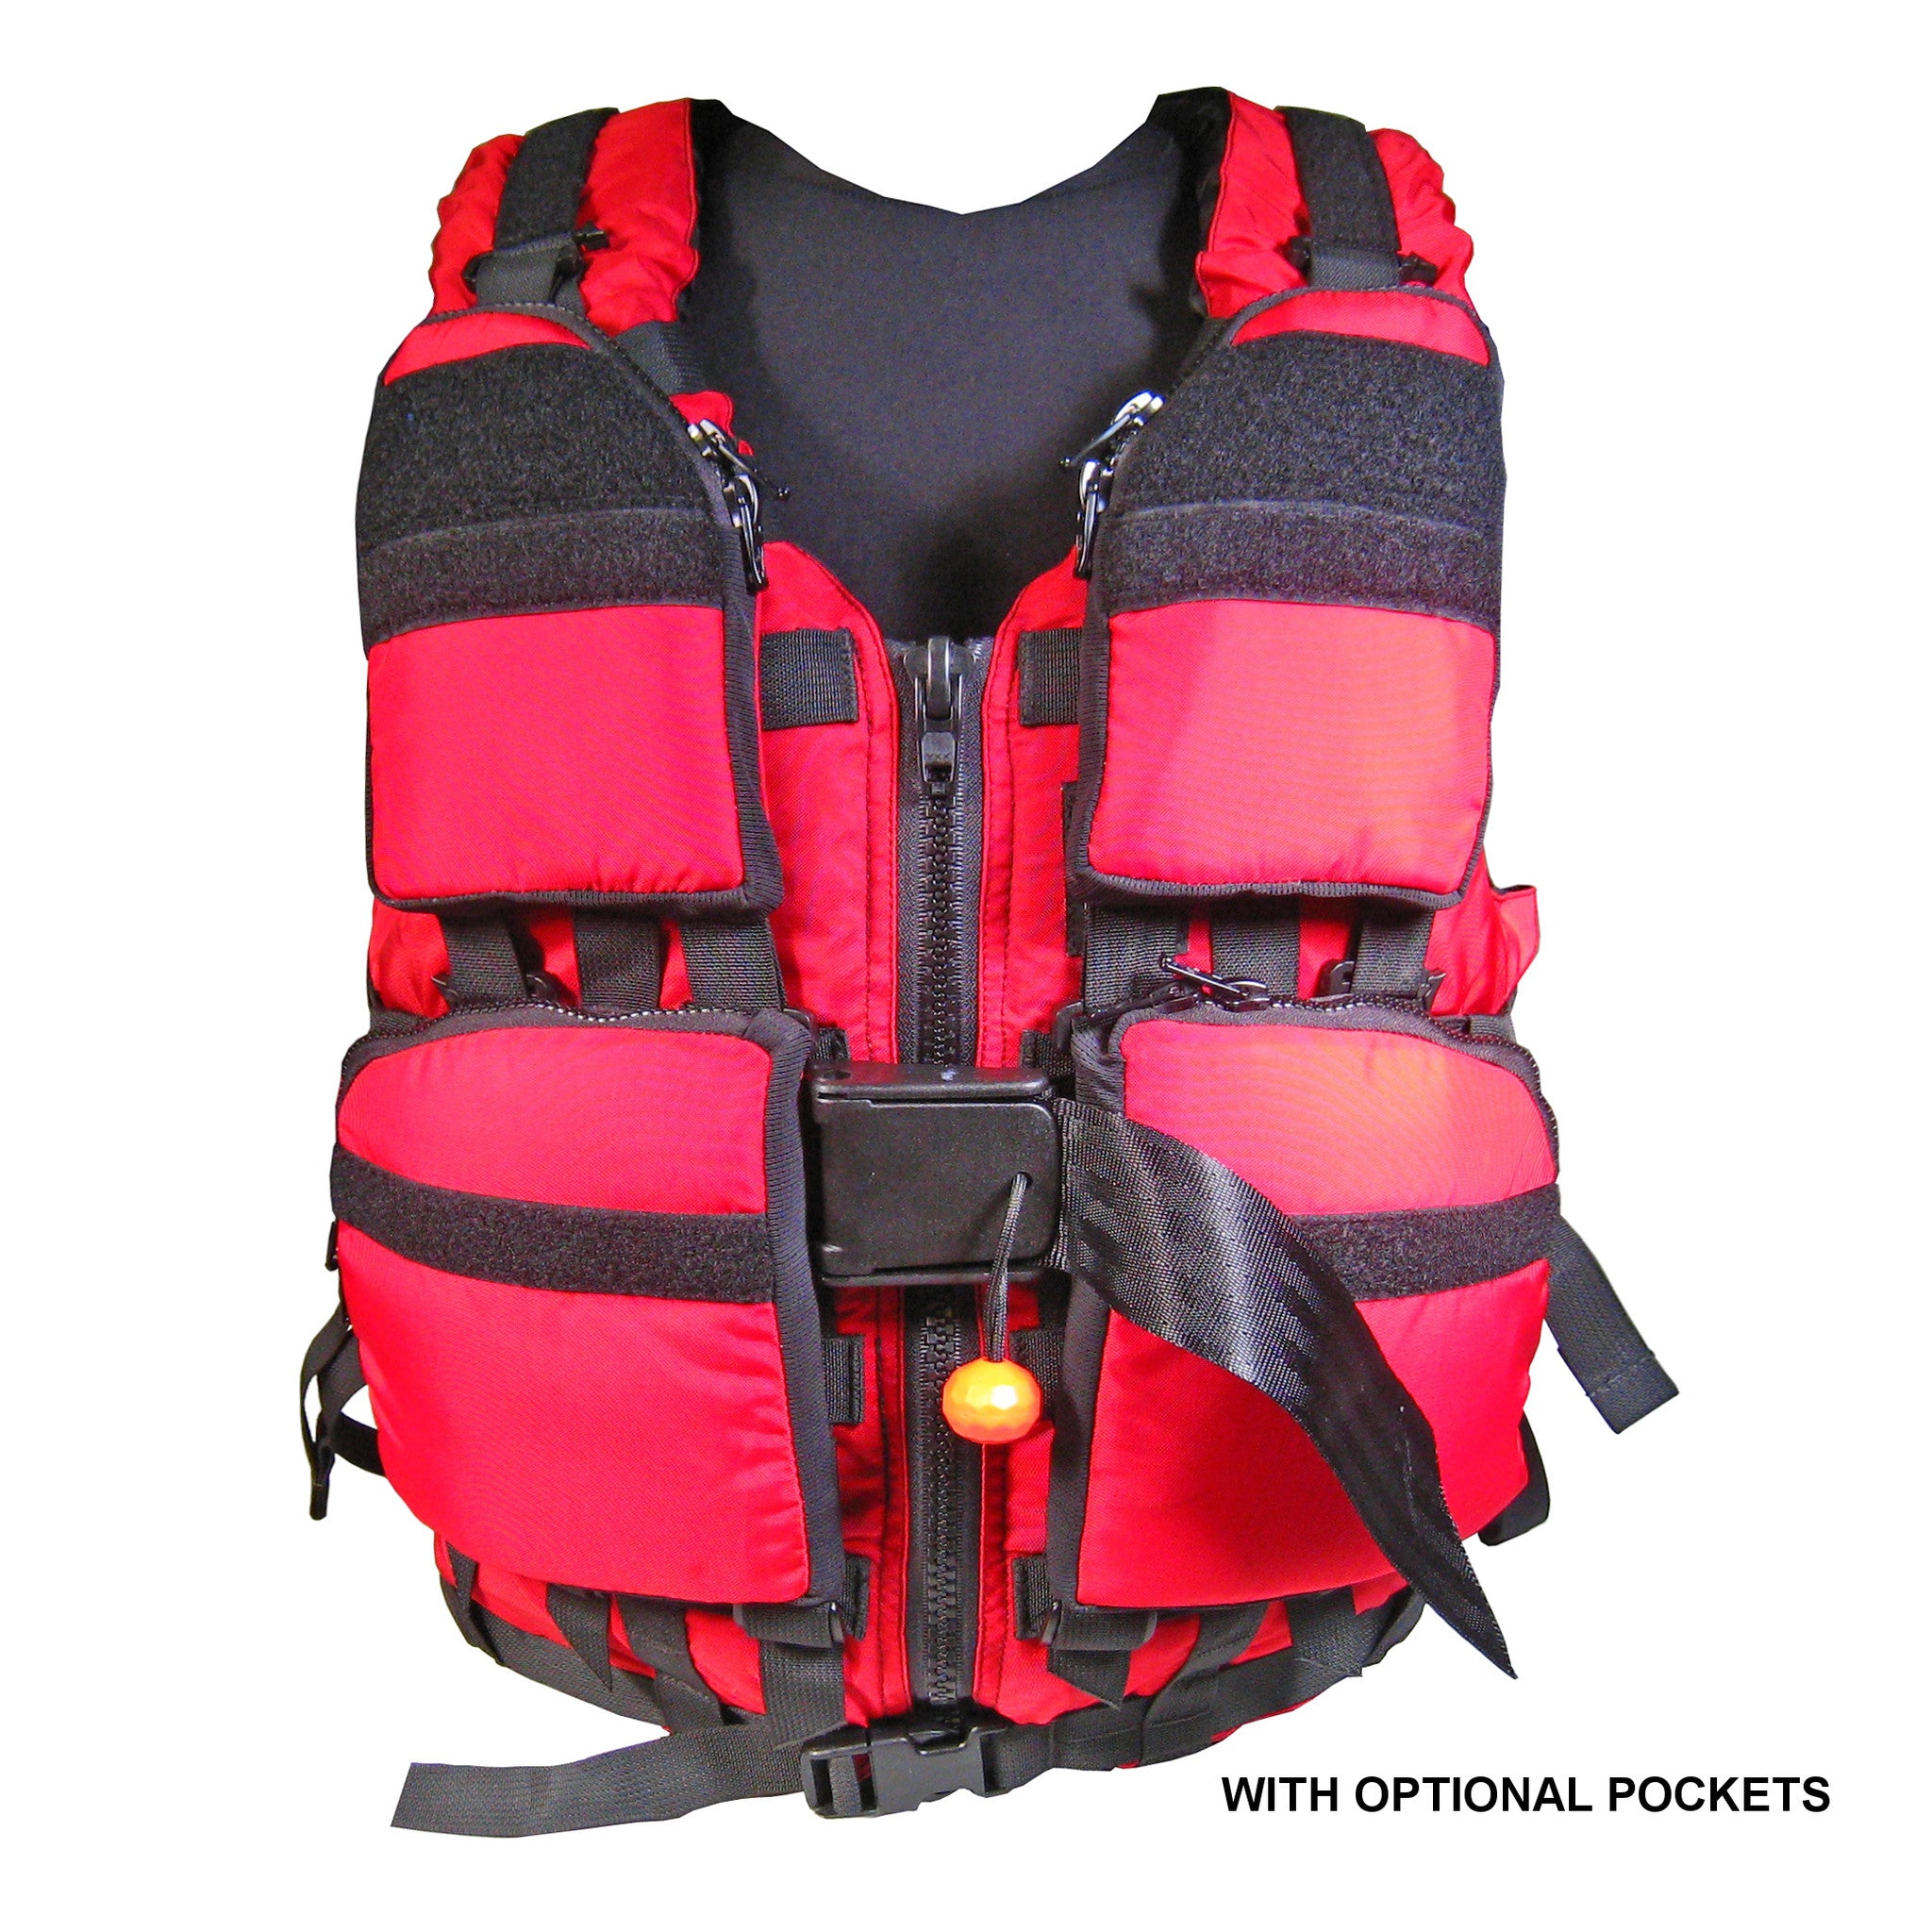 MOLLE System PFD